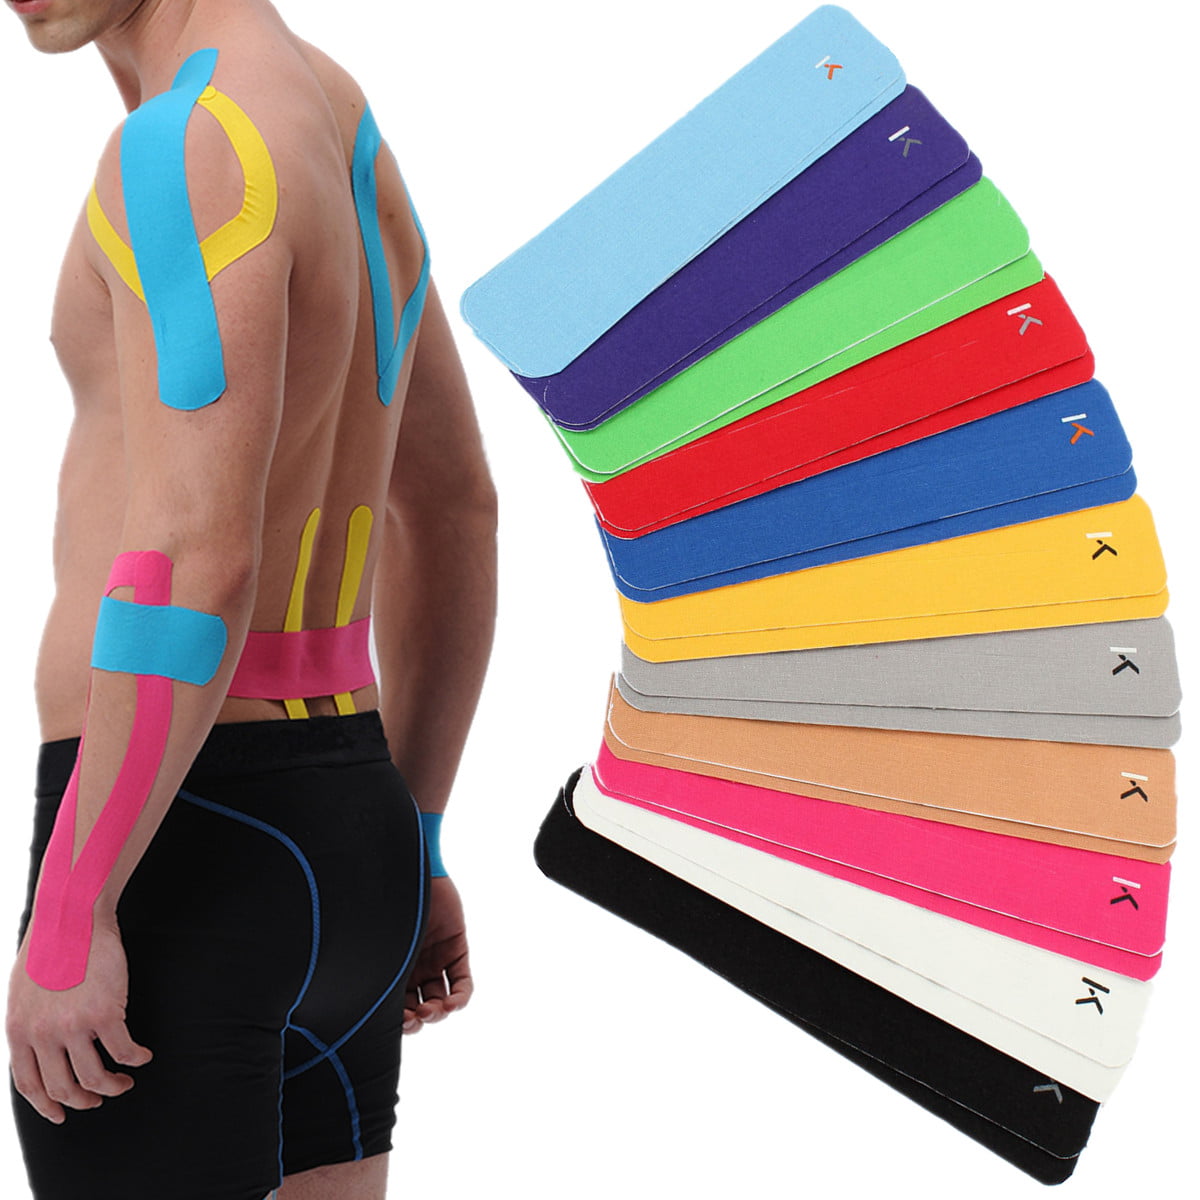 Sports Kinesiology Tape Elastic Physio Muscle Tape PRO Pain Relief Support 